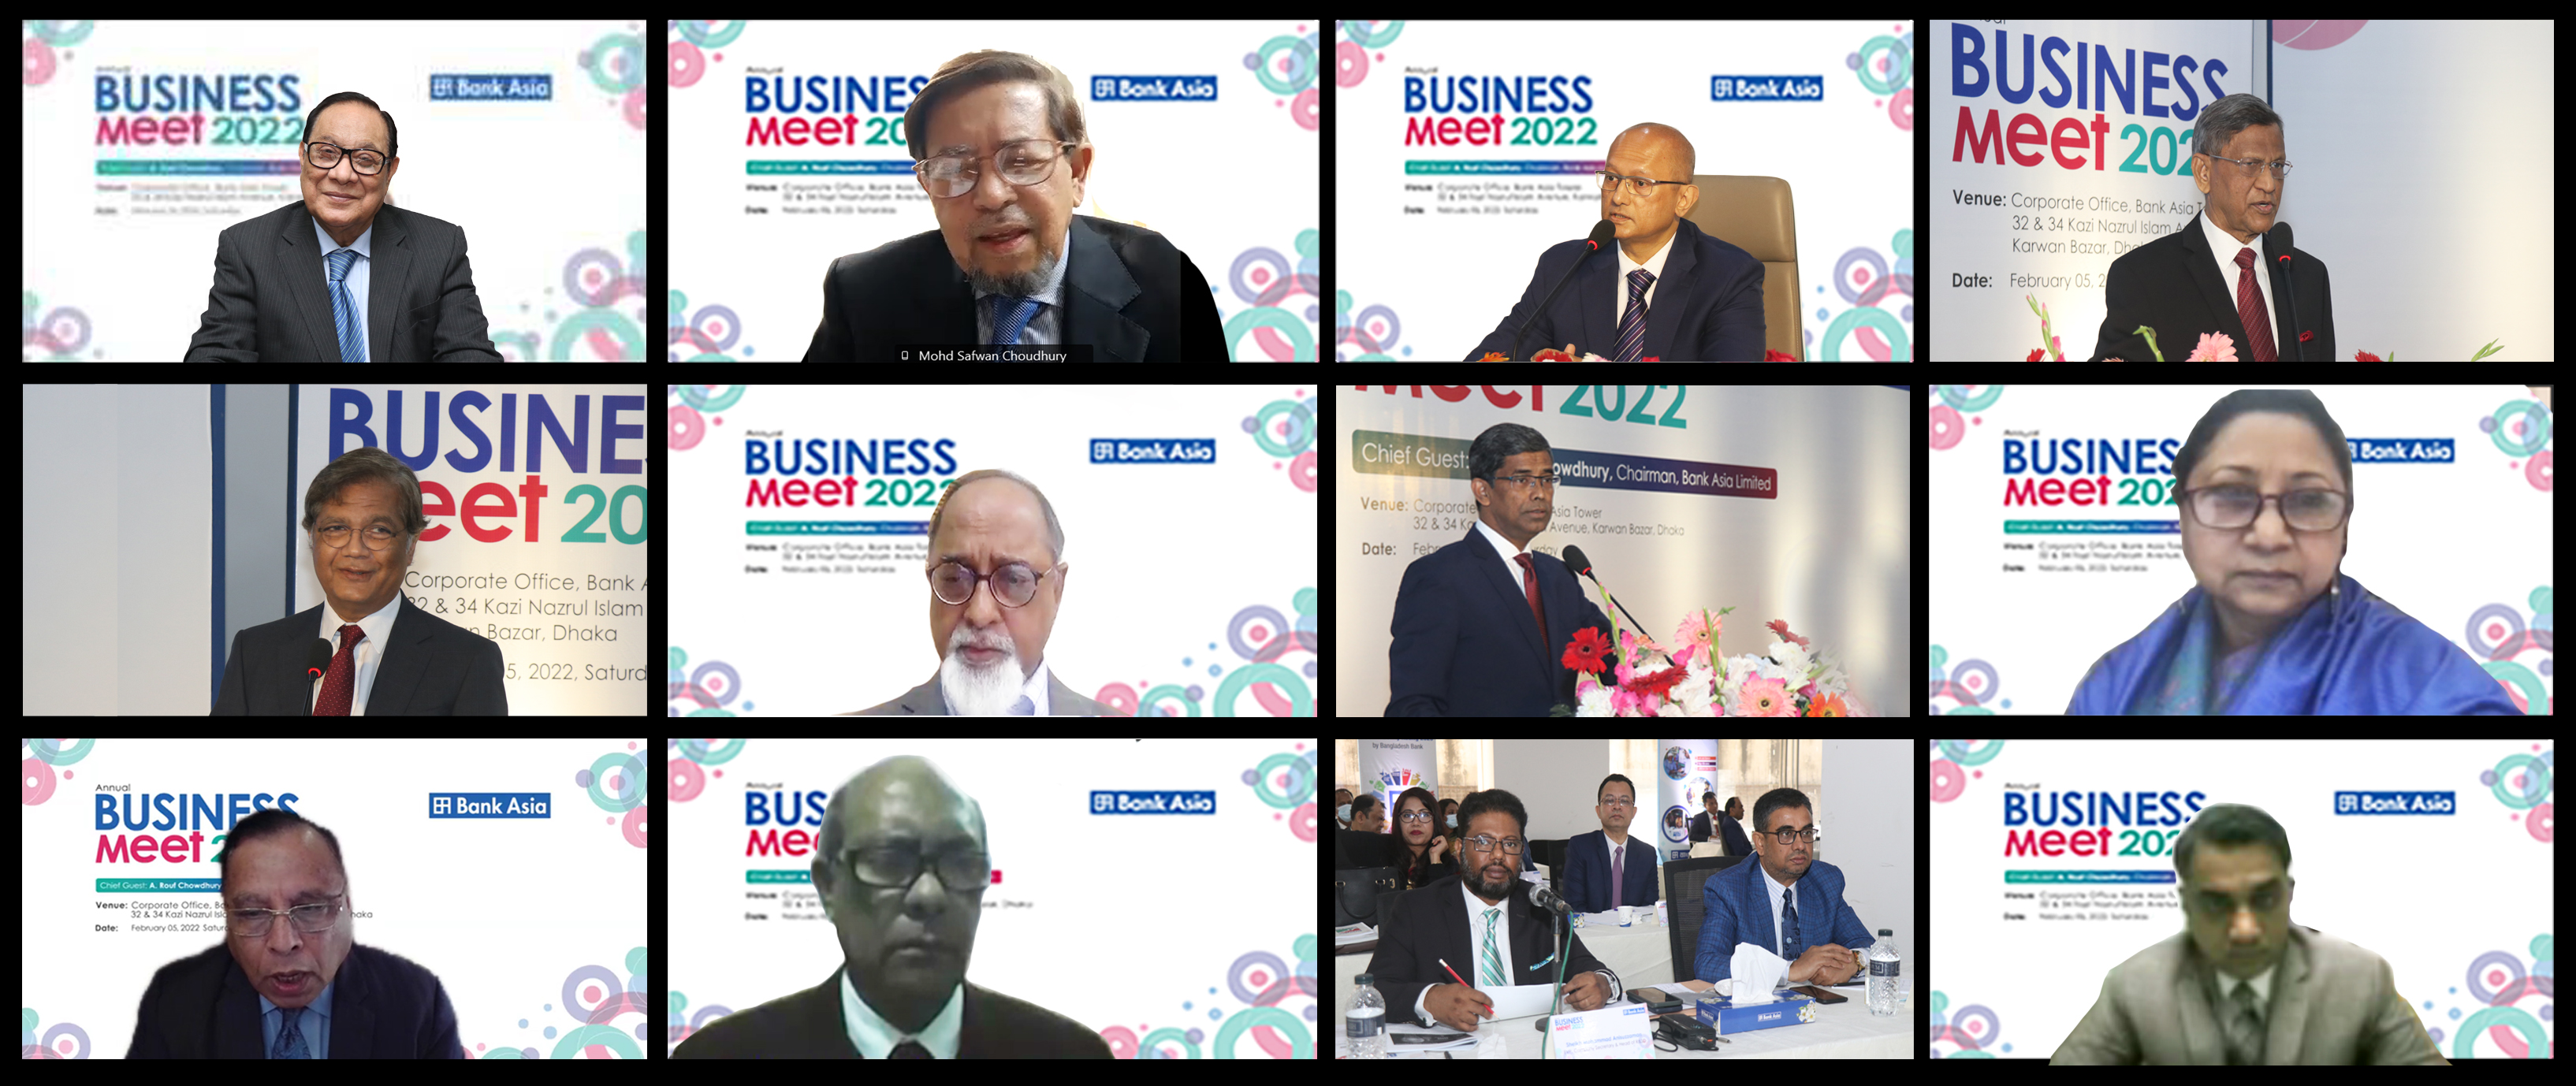 Bank Asia Held Annual Business Meet 2022